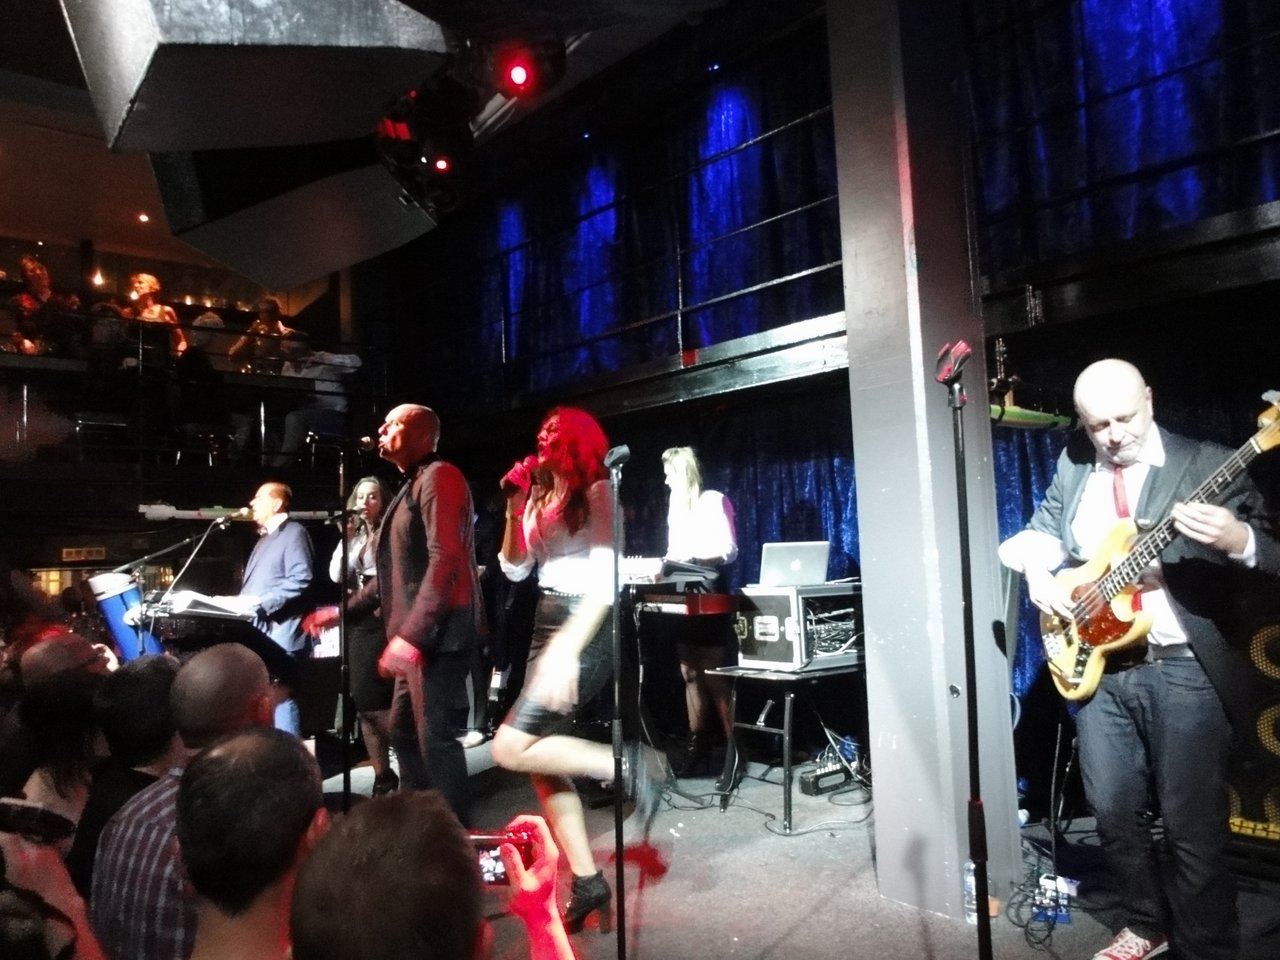 35 Heaven 17 at the Jazz Cafe Feb2014.jpg